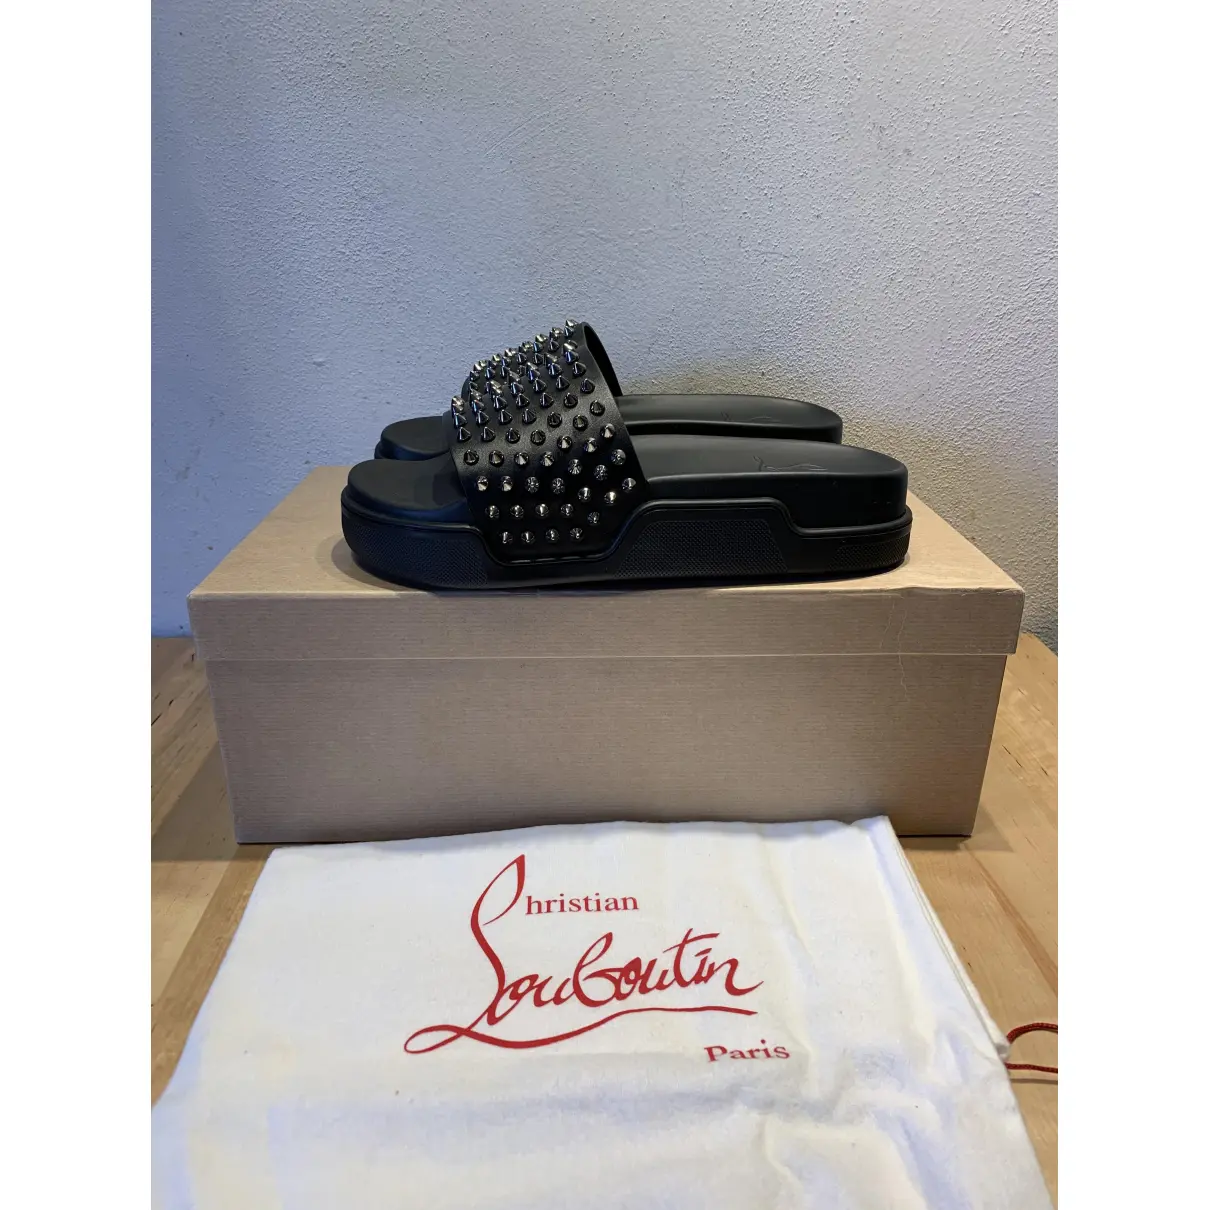 Buy Christian Louboutin Spikaqueen leather mules online